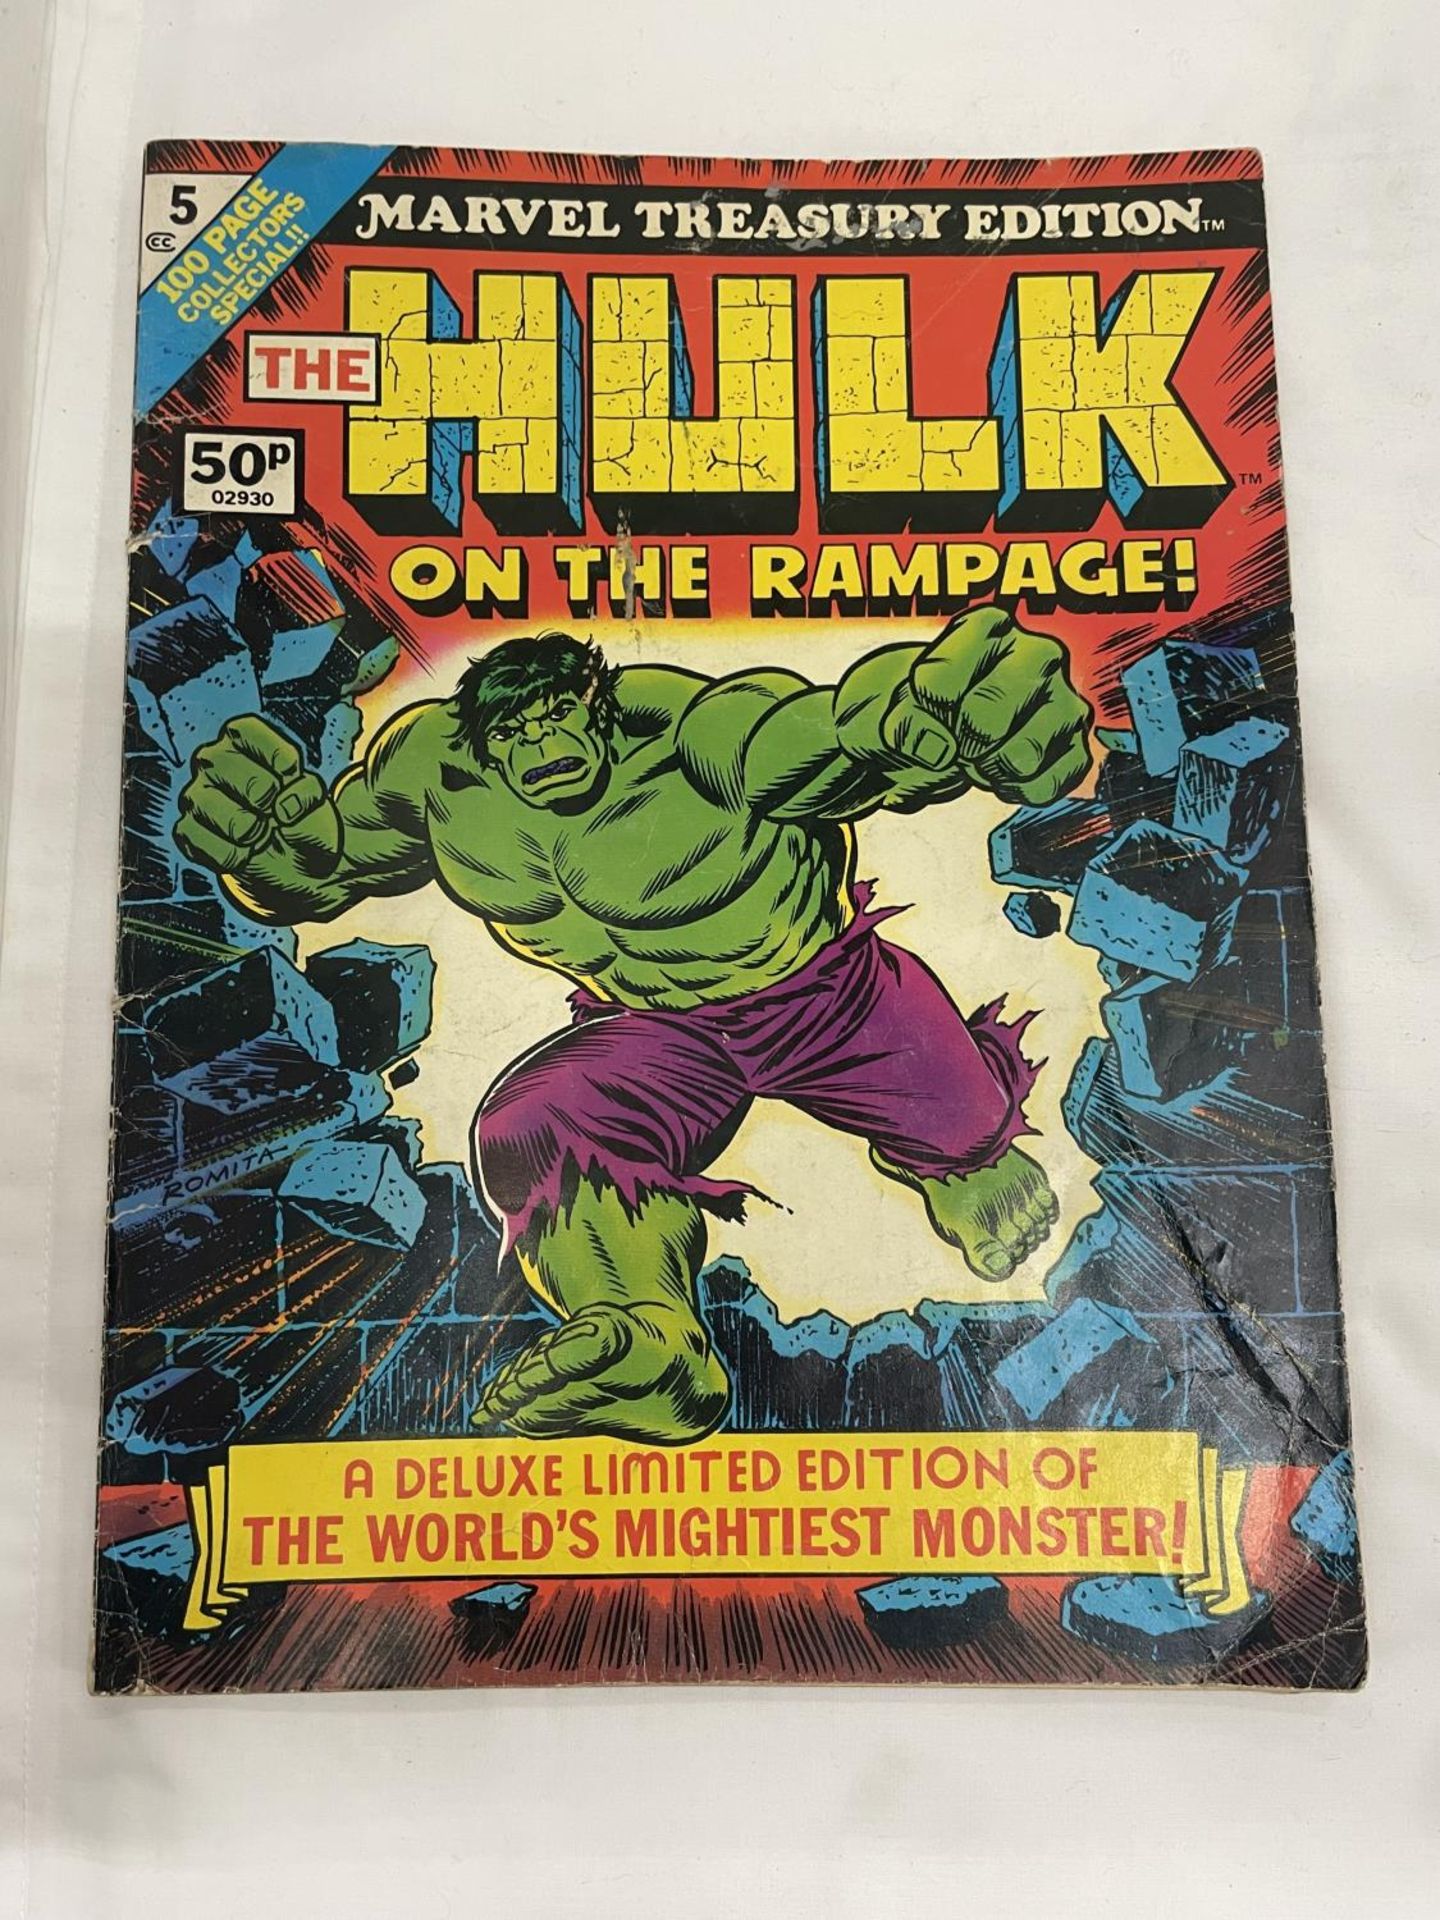 TWO MARVEL COMICS TREASURY EDITION COMICS, 1975, 'THE HULK ON THE RAMPAGE' AND 'THE MIGHTY AVENGERS' - Image 2 of 3